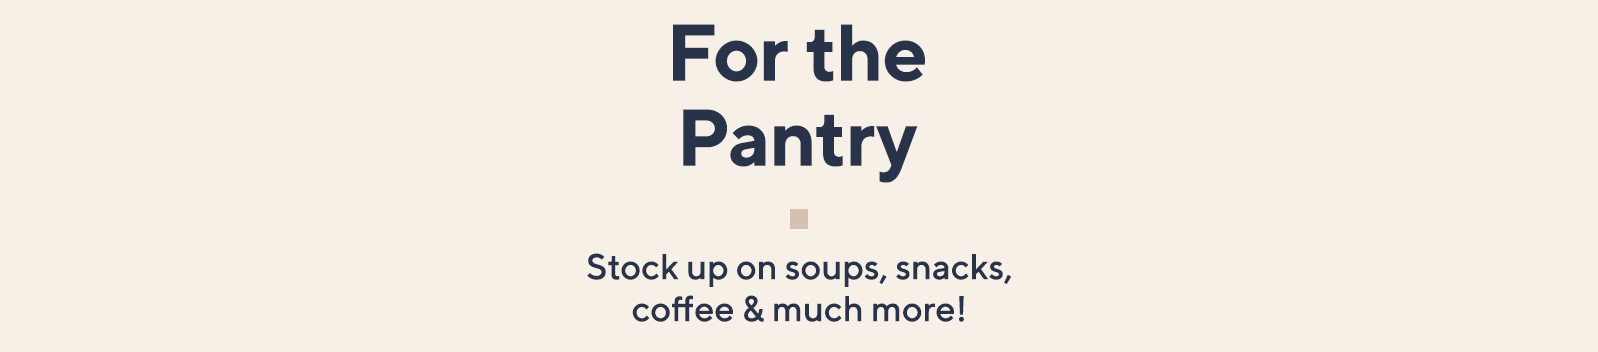 For the Pantry  Stock up on soups, snacks, coffee & much more! 